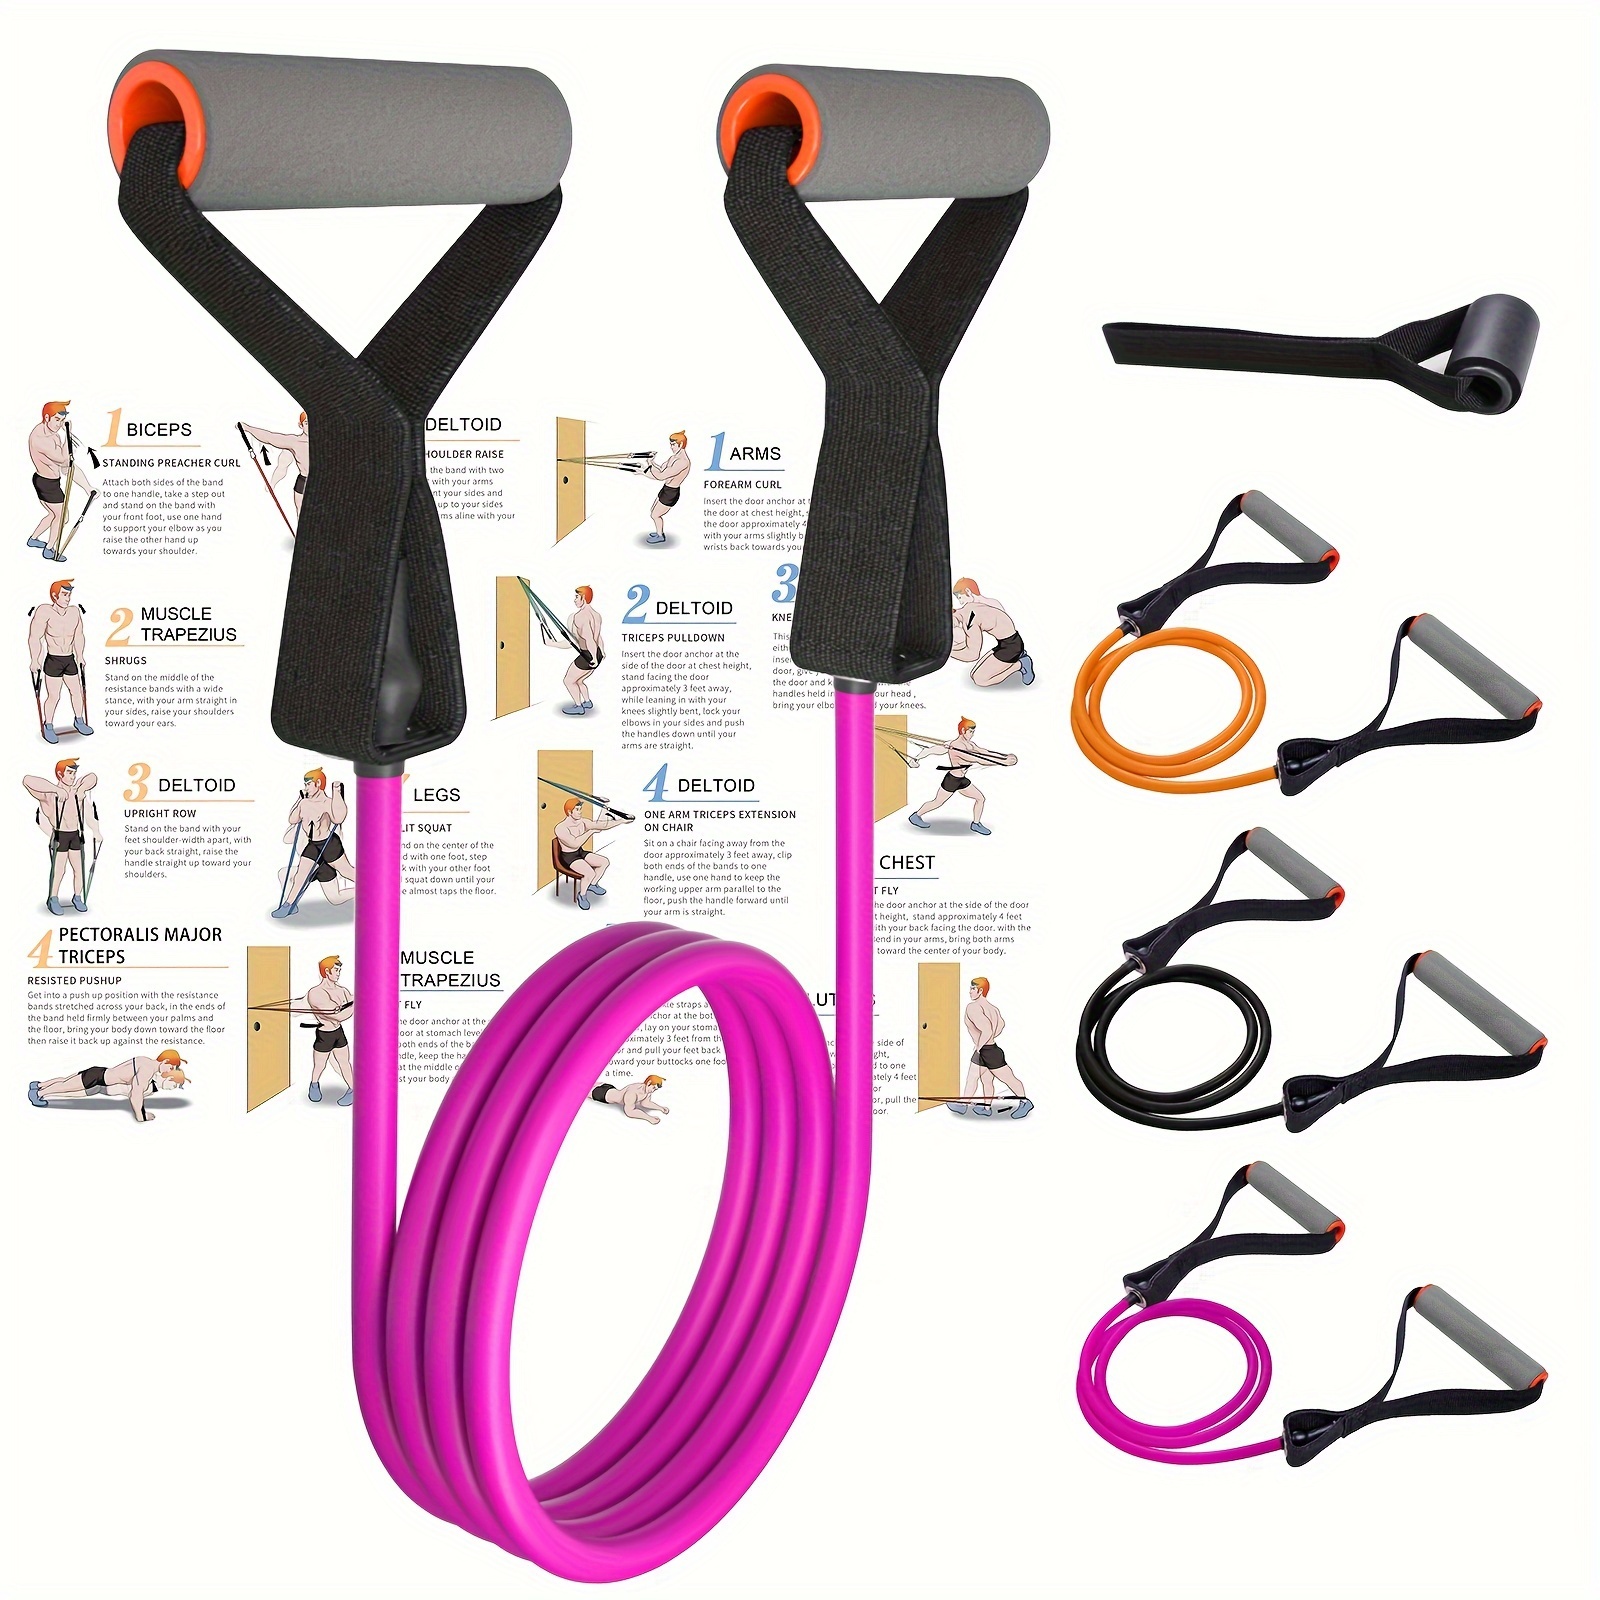 

High Quality Latex Resistance Band With Big Handles And Door Anchor, Exercise Bands, Workout Bands, Suitable For Fitness Strength Training, Yoga, Pilates, Home Gym